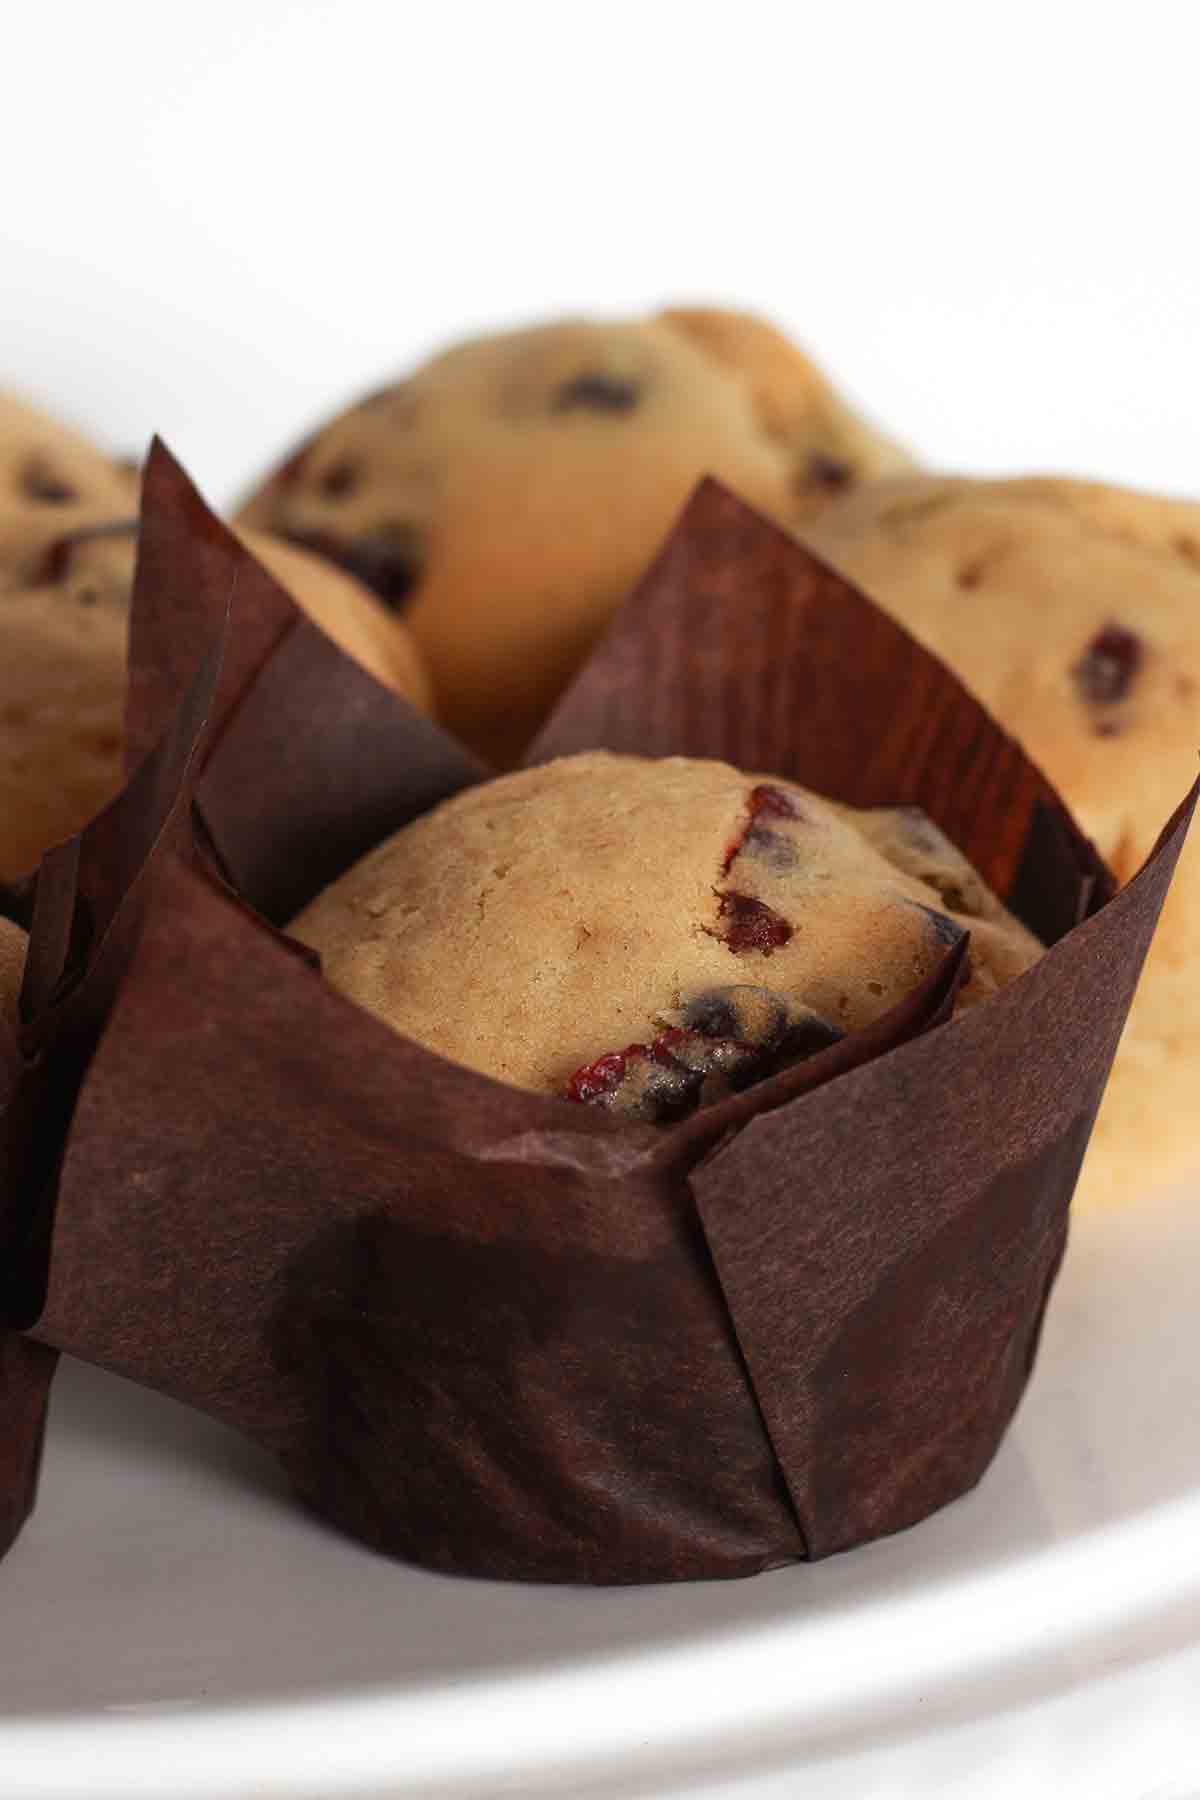 A Muffin In A Brown Paper Liner